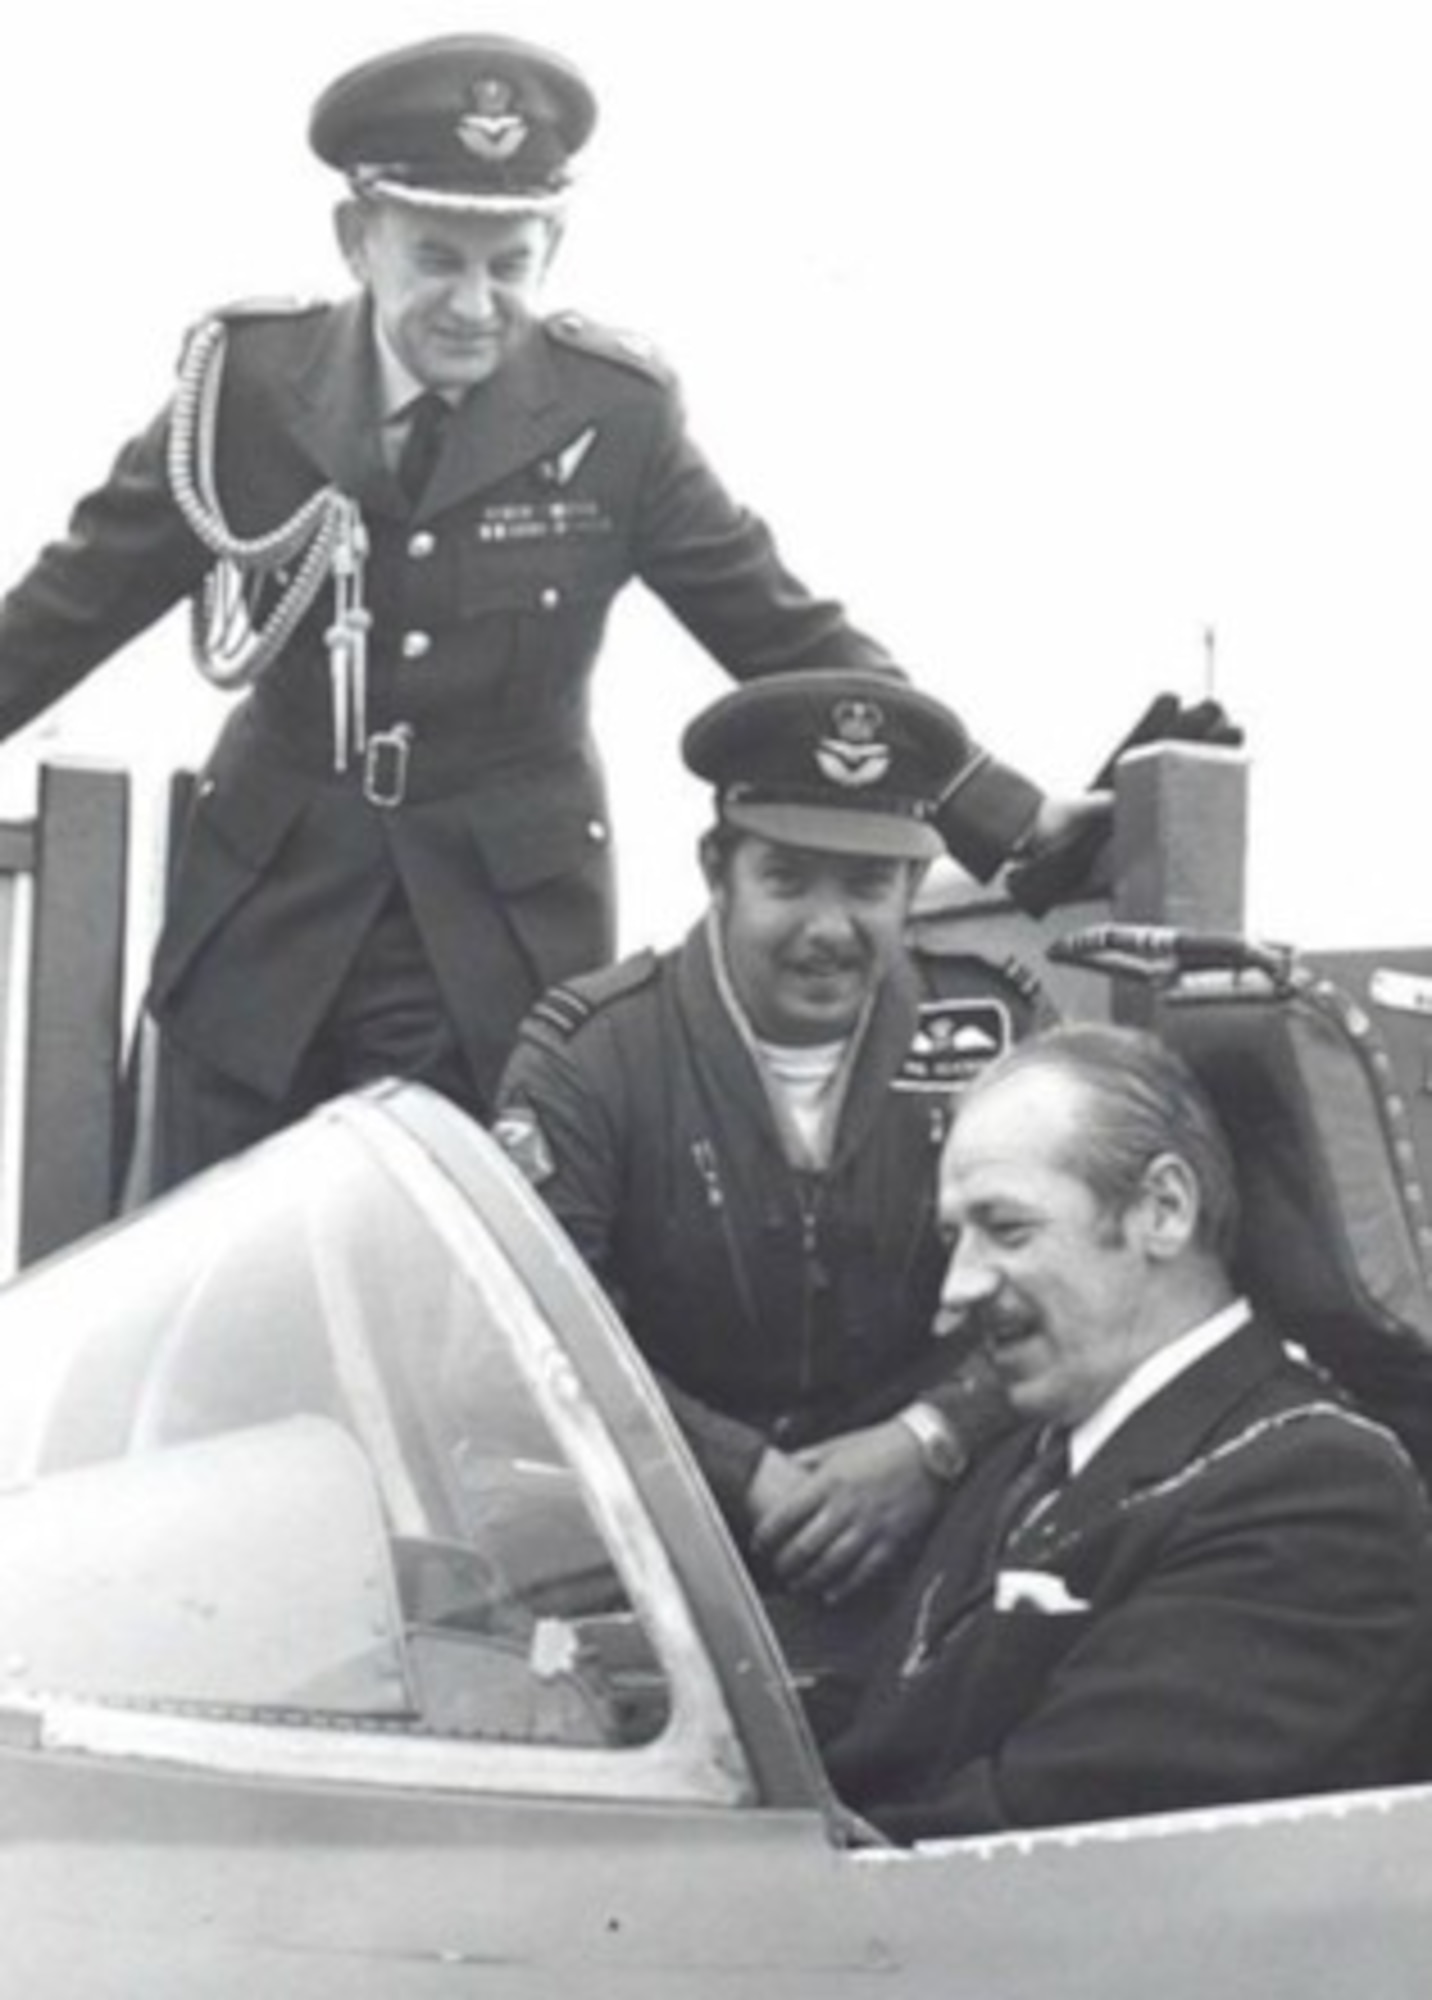 A man sits in a military aircraft cockpit while two other men in military uniform look on.